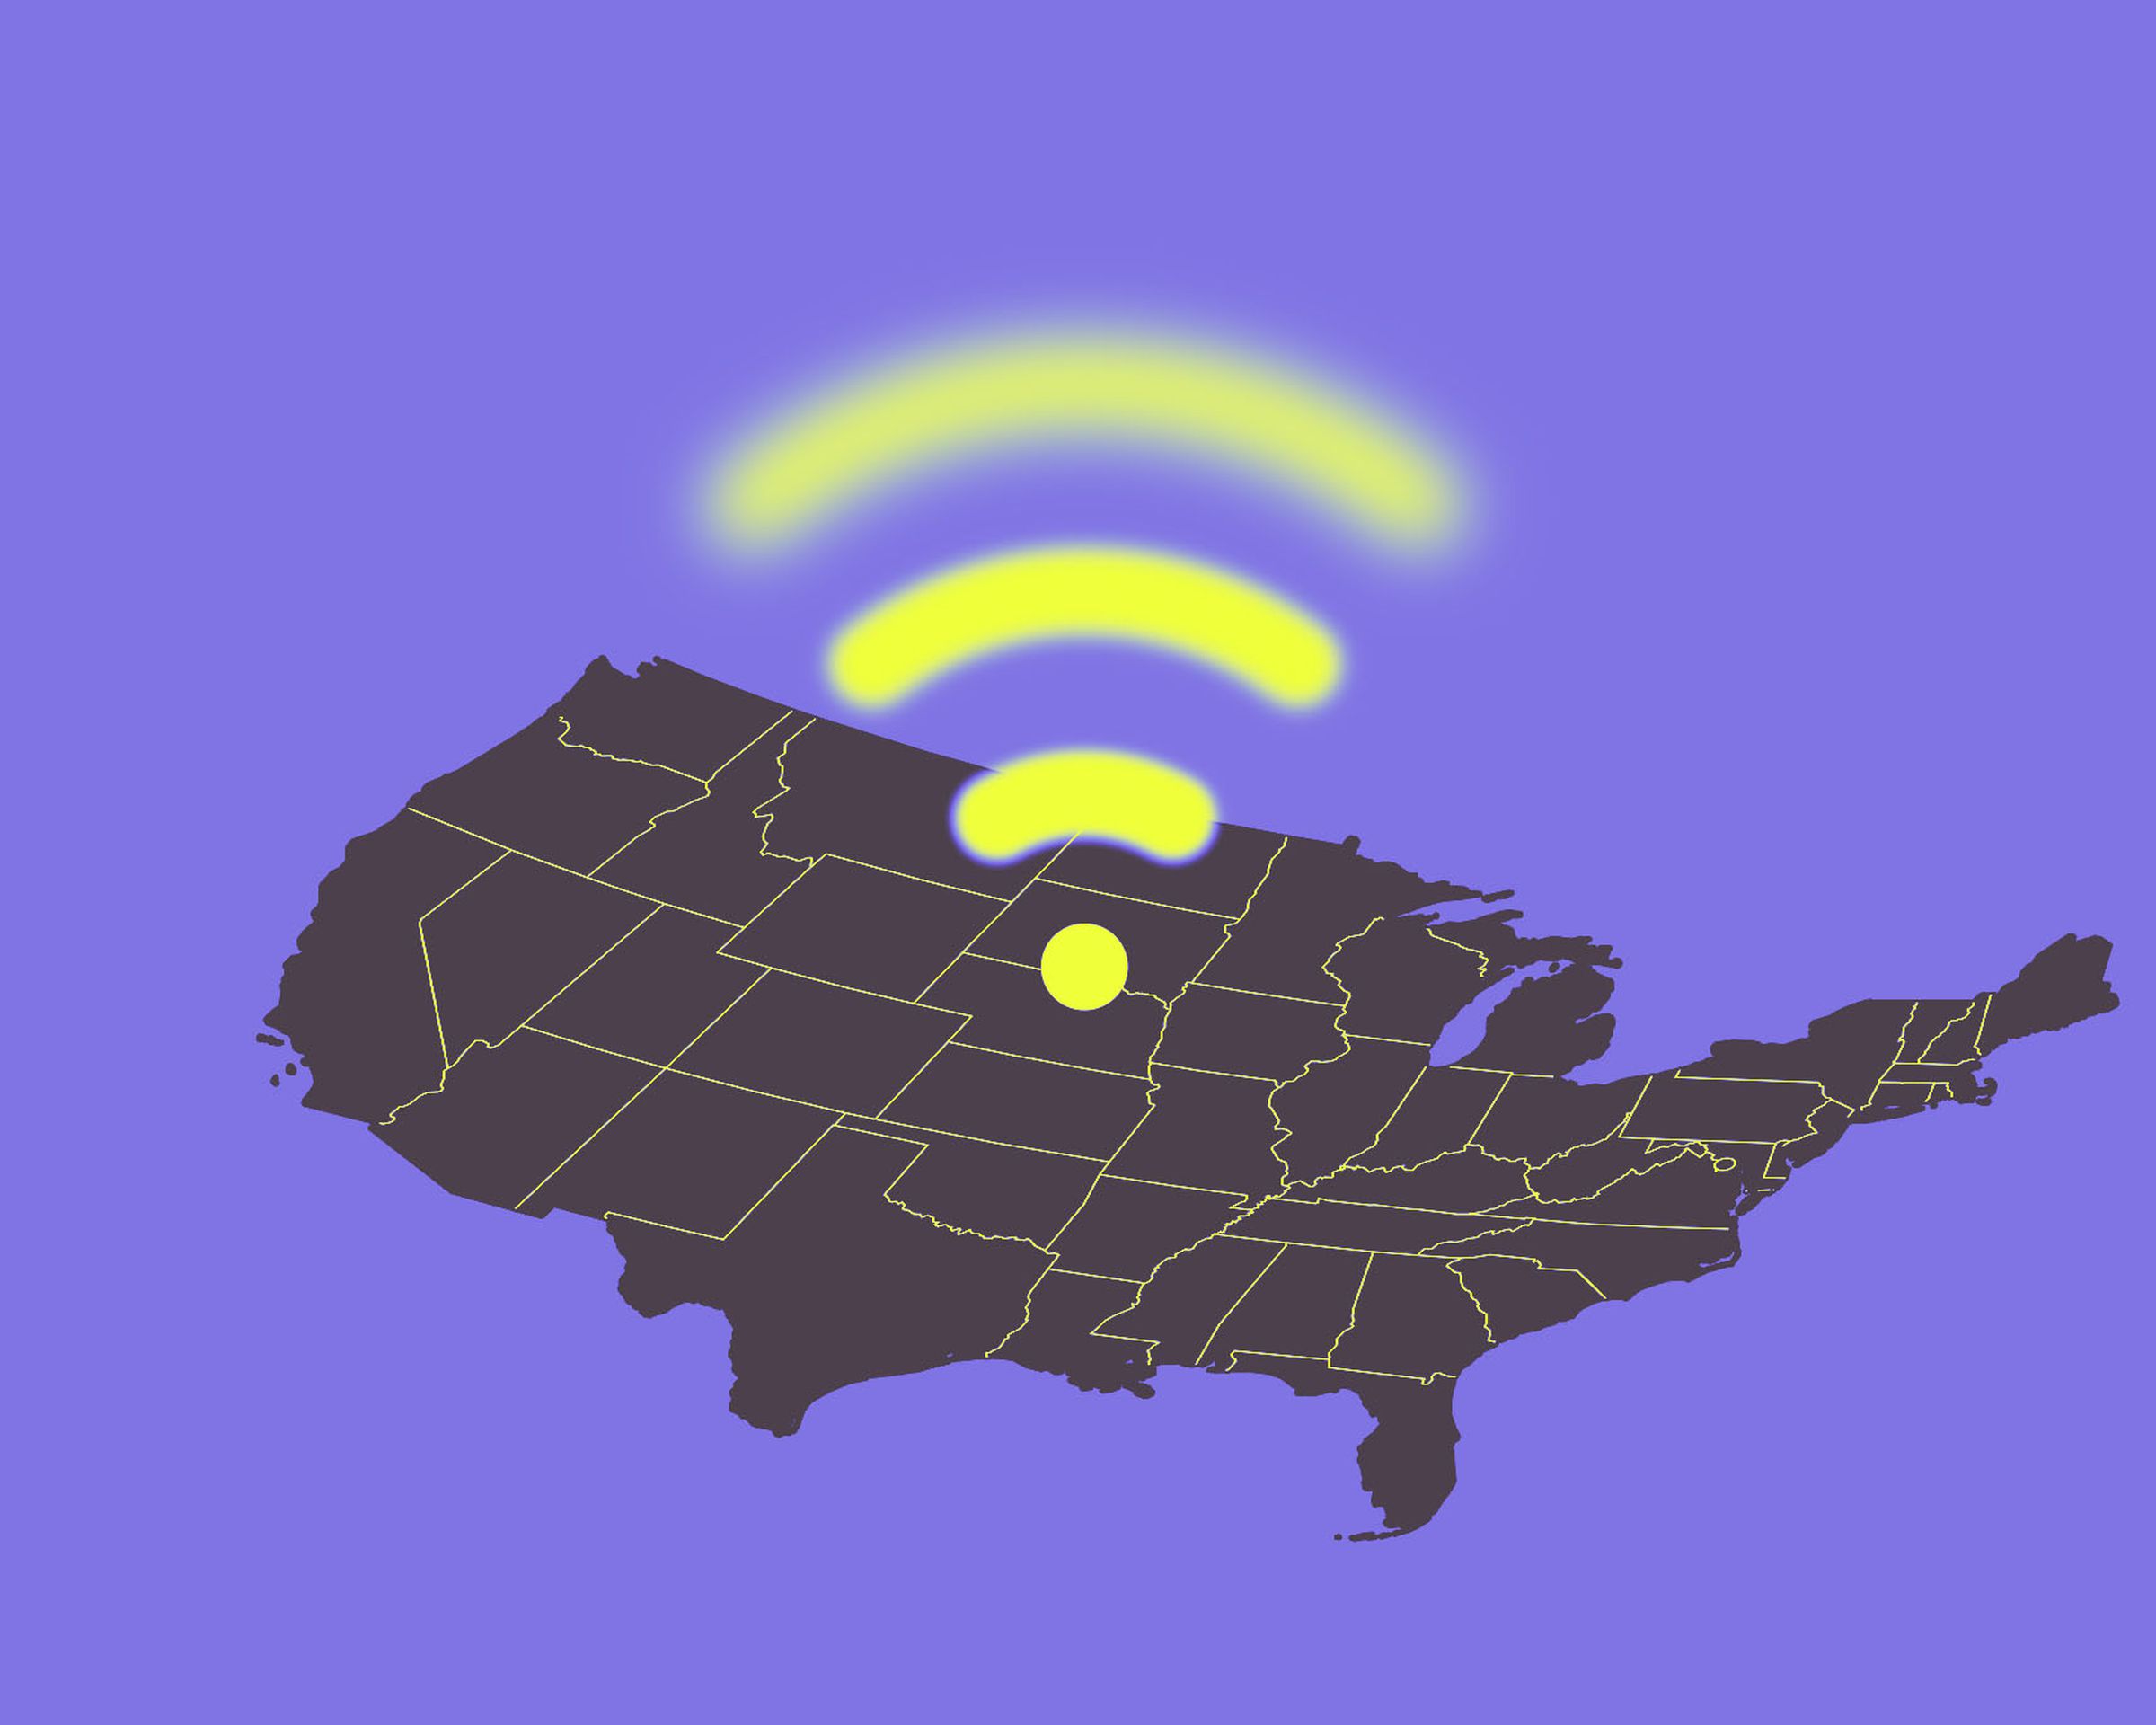 A fading Wifi symbol above the United States.